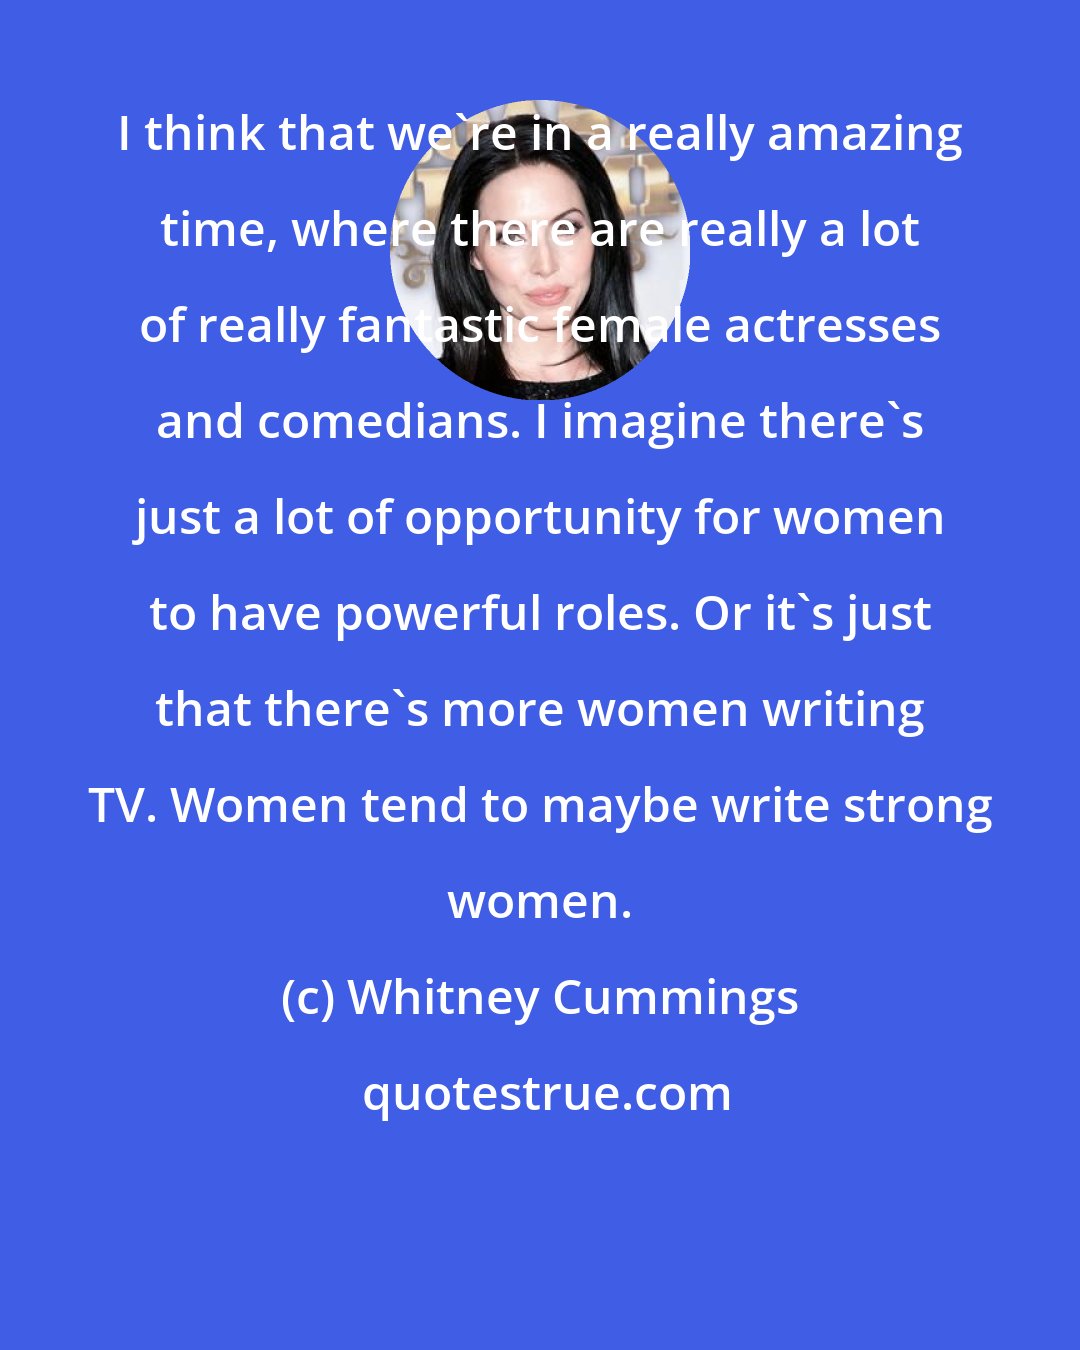 Whitney Cummings: I think that we're in a really amazing time, where there are really a lot of really fantastic female actresses and comedians. I imagine there's just a lot of opportunity for women to have powerful roles. Or it's just that there's more women writing TV. Women tend to maybe write strong women.